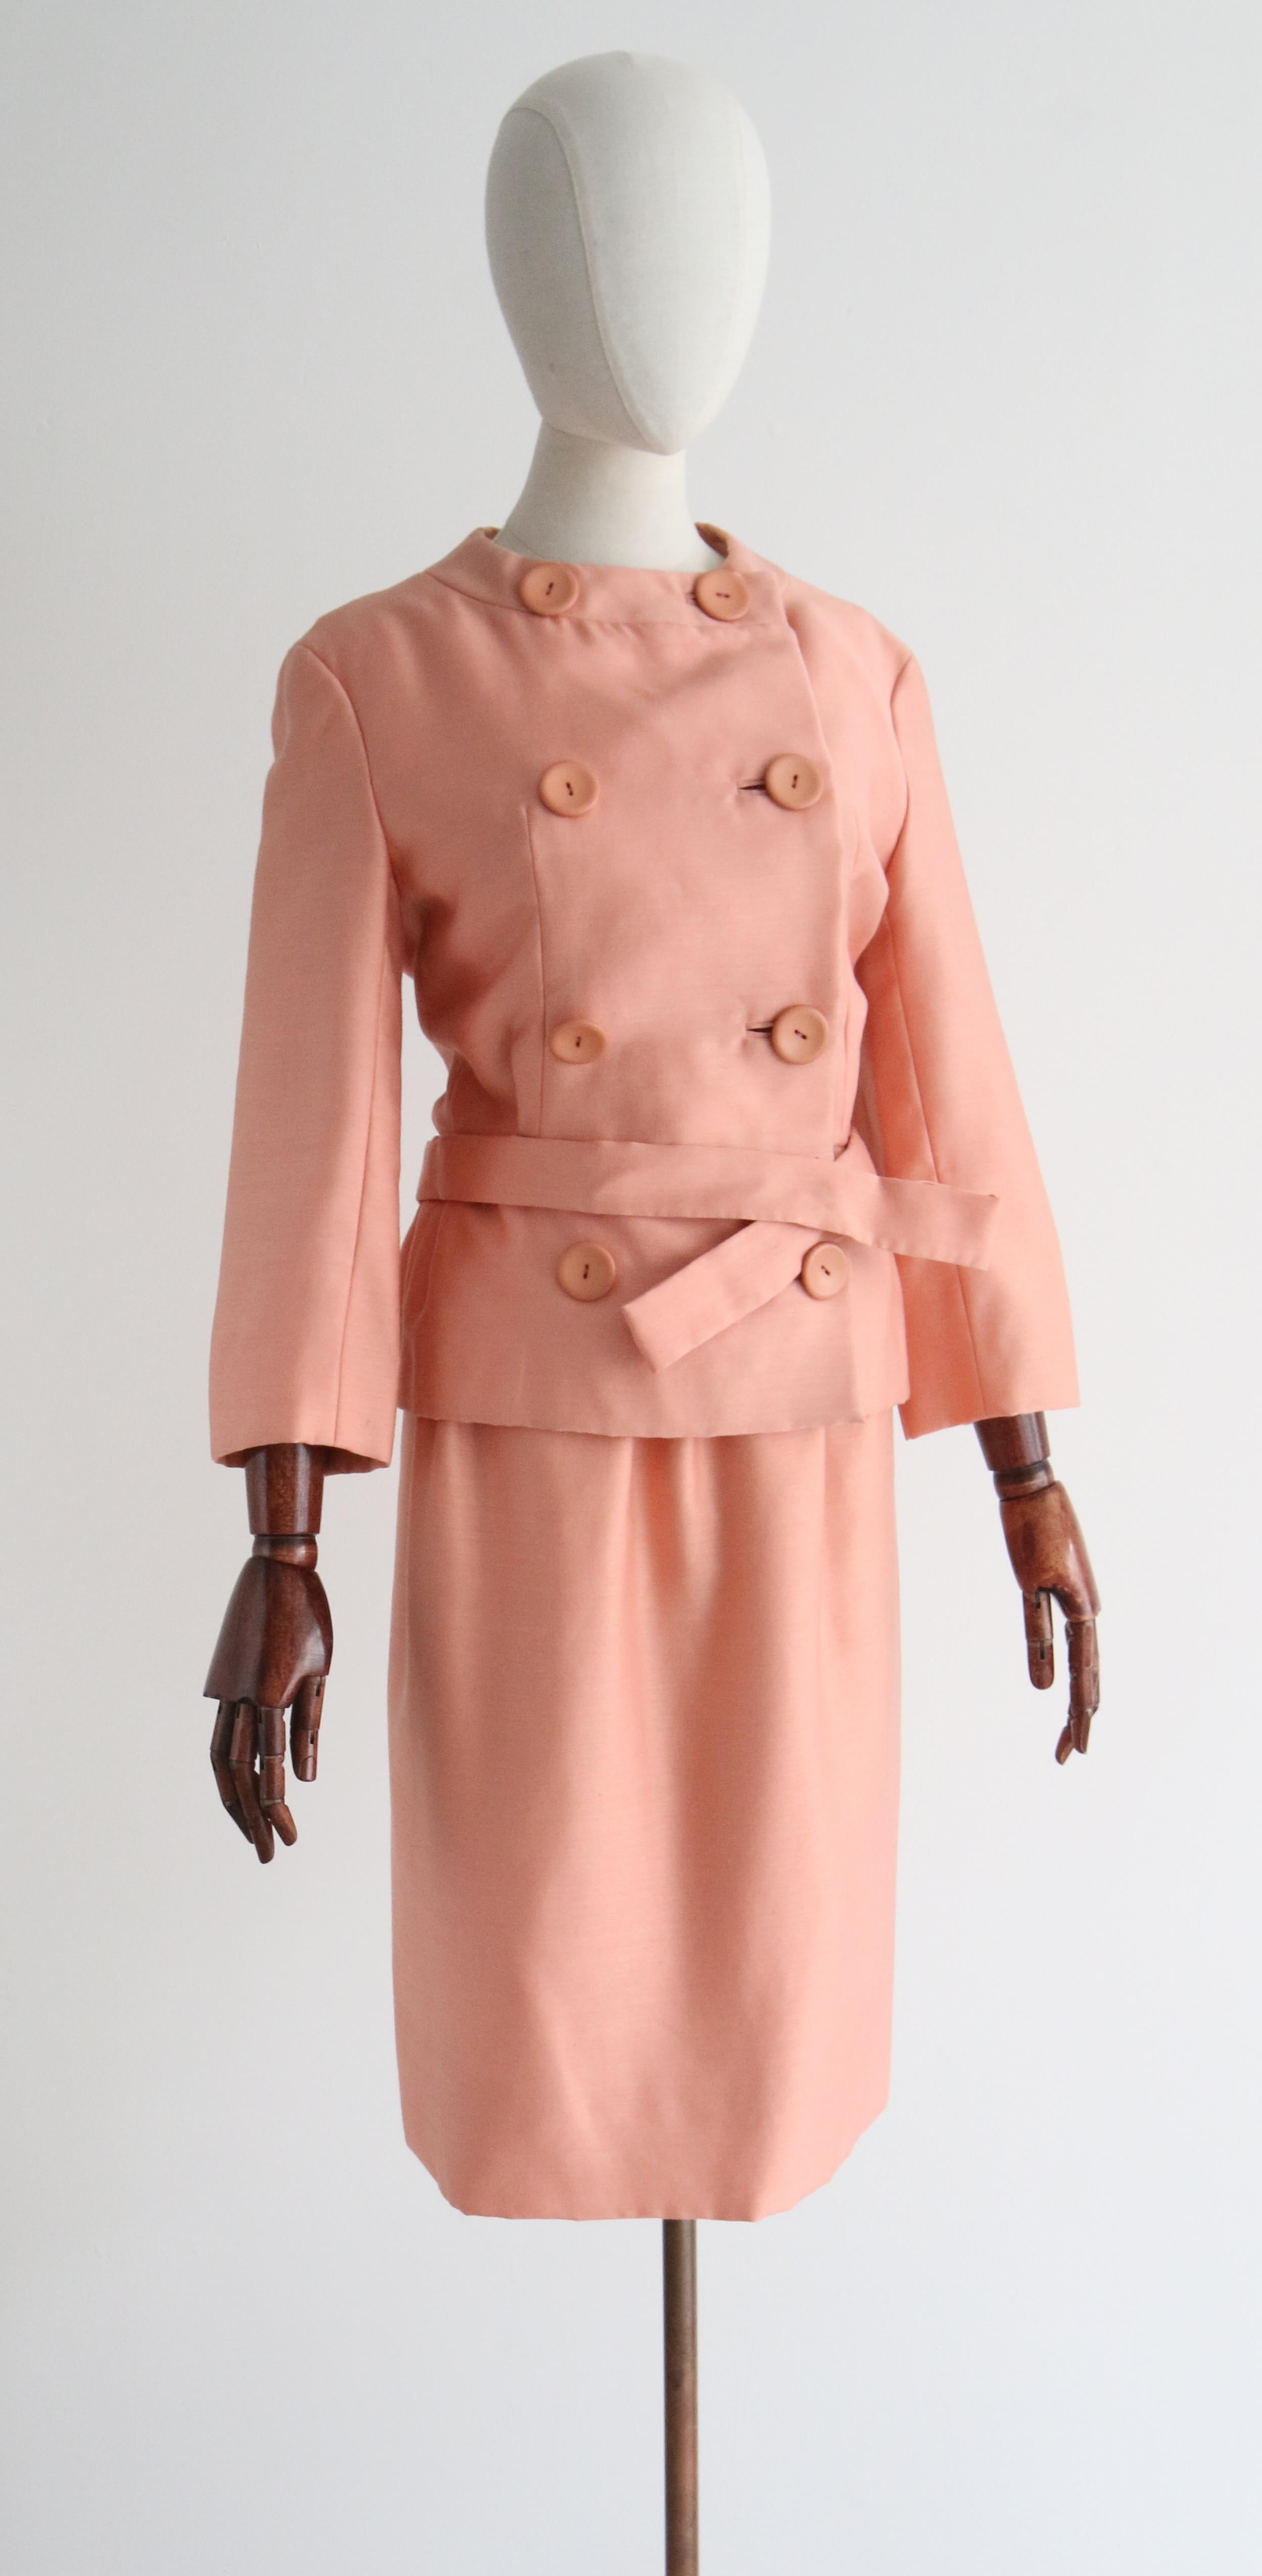 Women's or Men's Vintage 1960's Christian Dior Peach Pink Silk Skirt Suit UK 6 US 2 For Sale